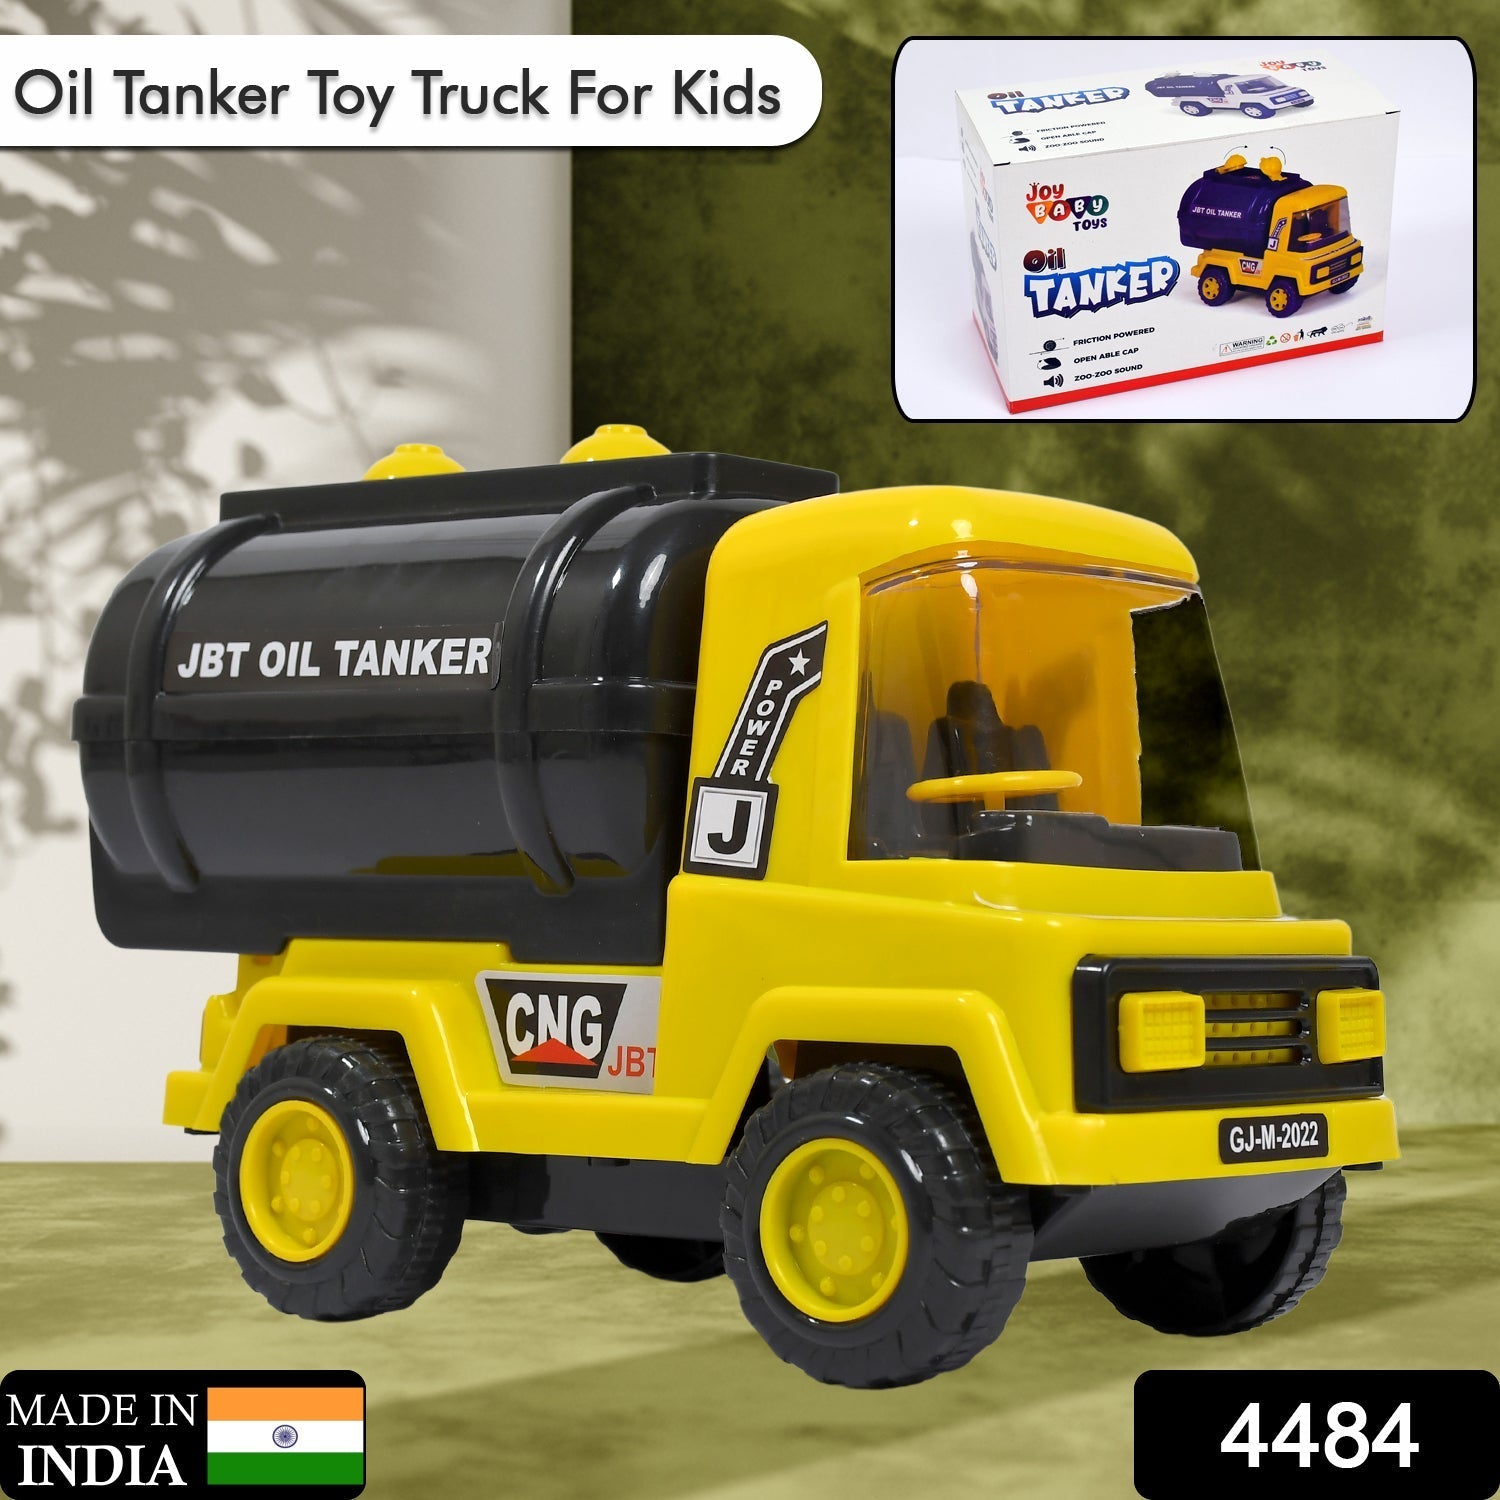 4484 Big Size Heavy Duty Unbreakable Friction Powered with Engine Sound While Running | Non Electric Toy |Tempo Oil - Water Tanker Vehicle Truck for Kids Size DeoDap